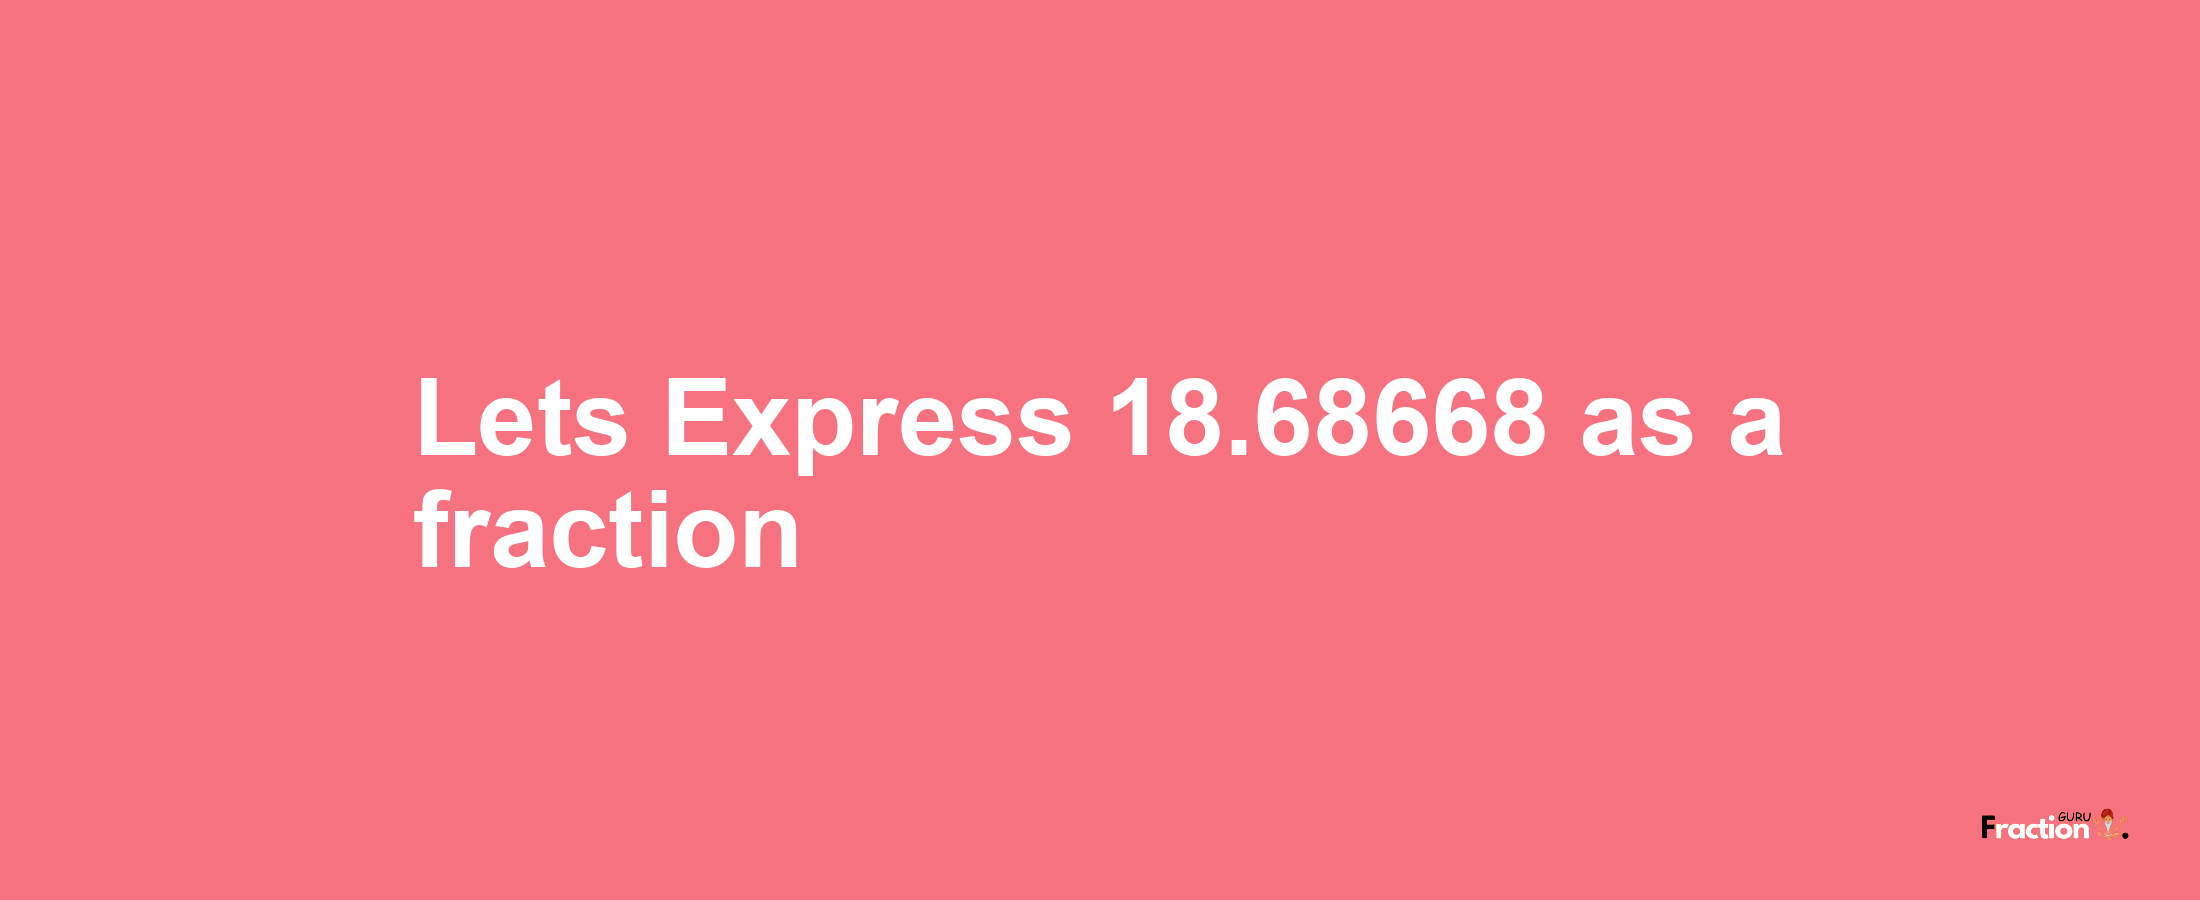 Lets Express 18.68668 as afraction